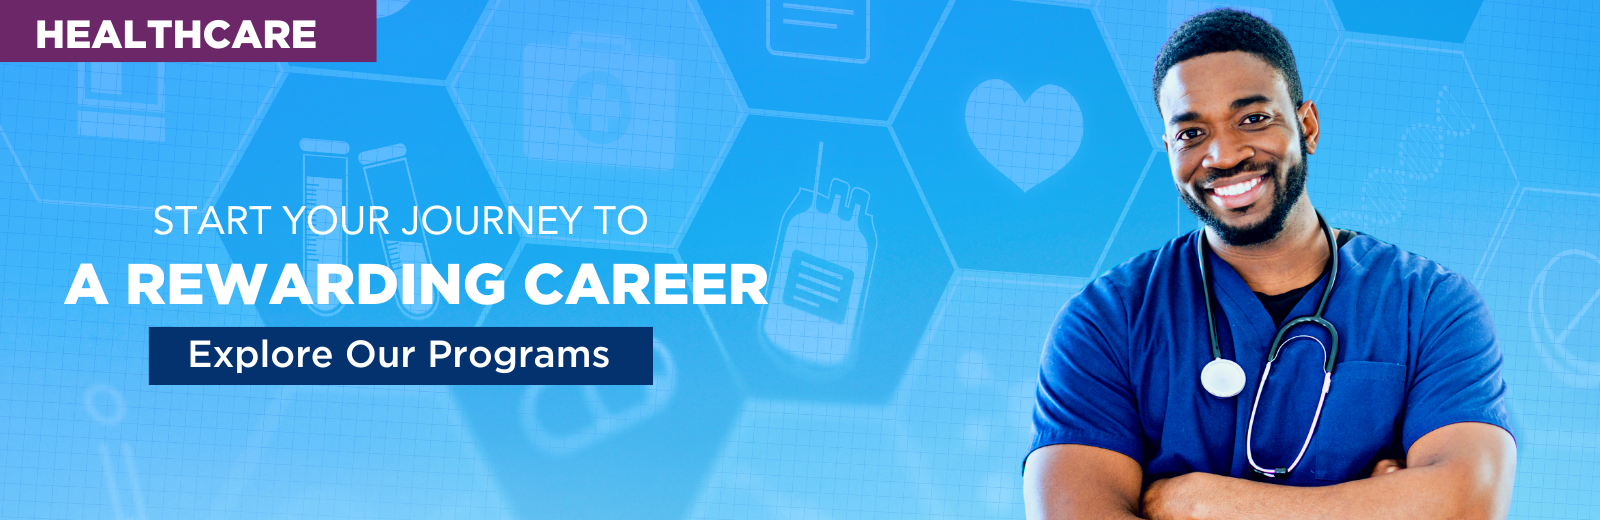 Choose a career in healthcare